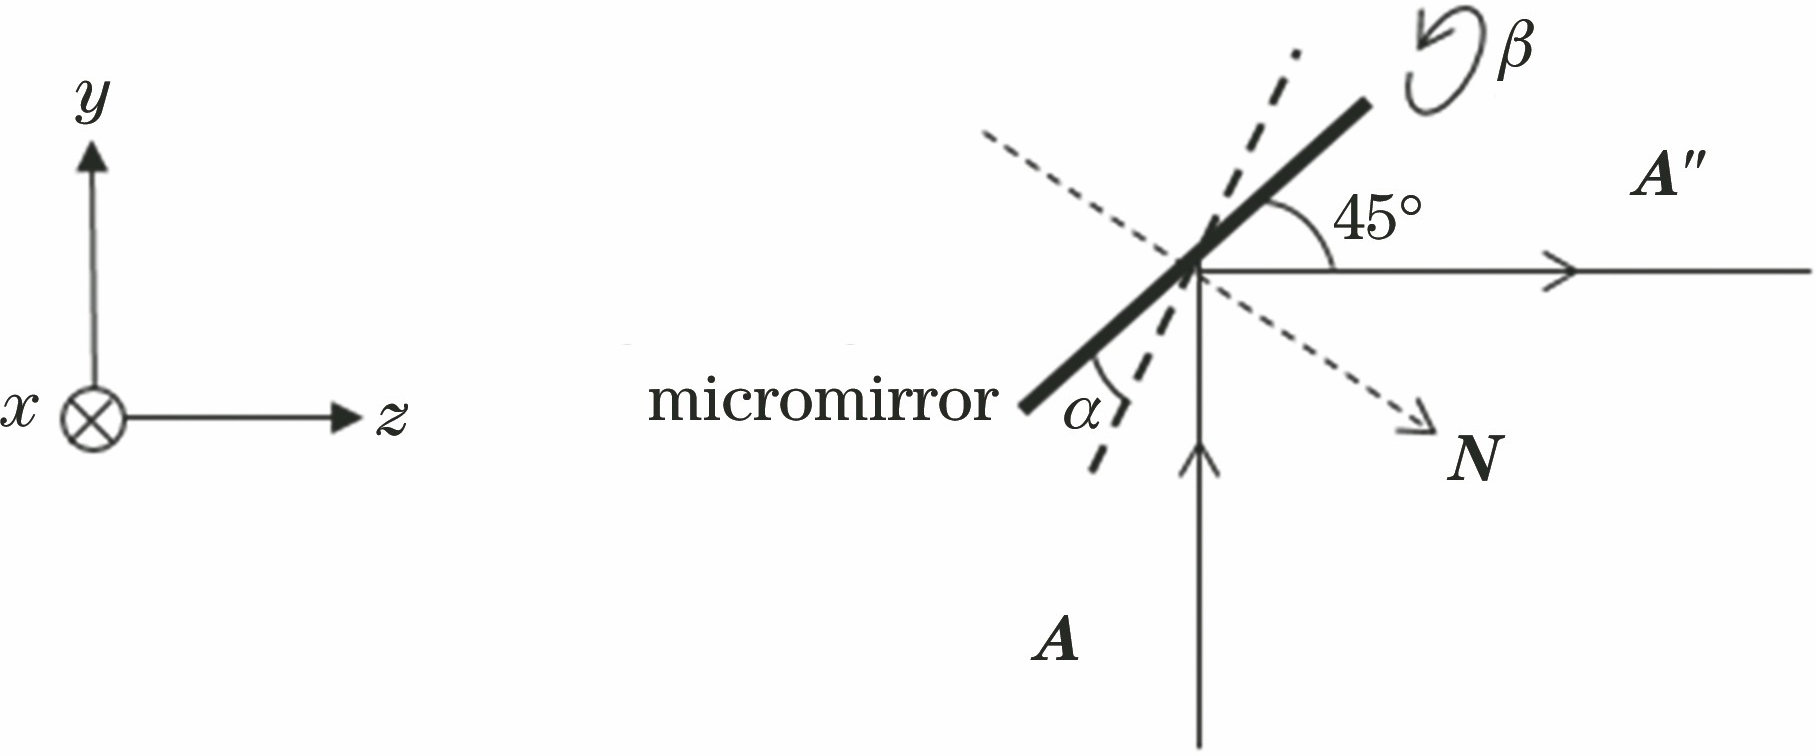 Schematic of rotation angle characteristic and reflective light path of micromirror